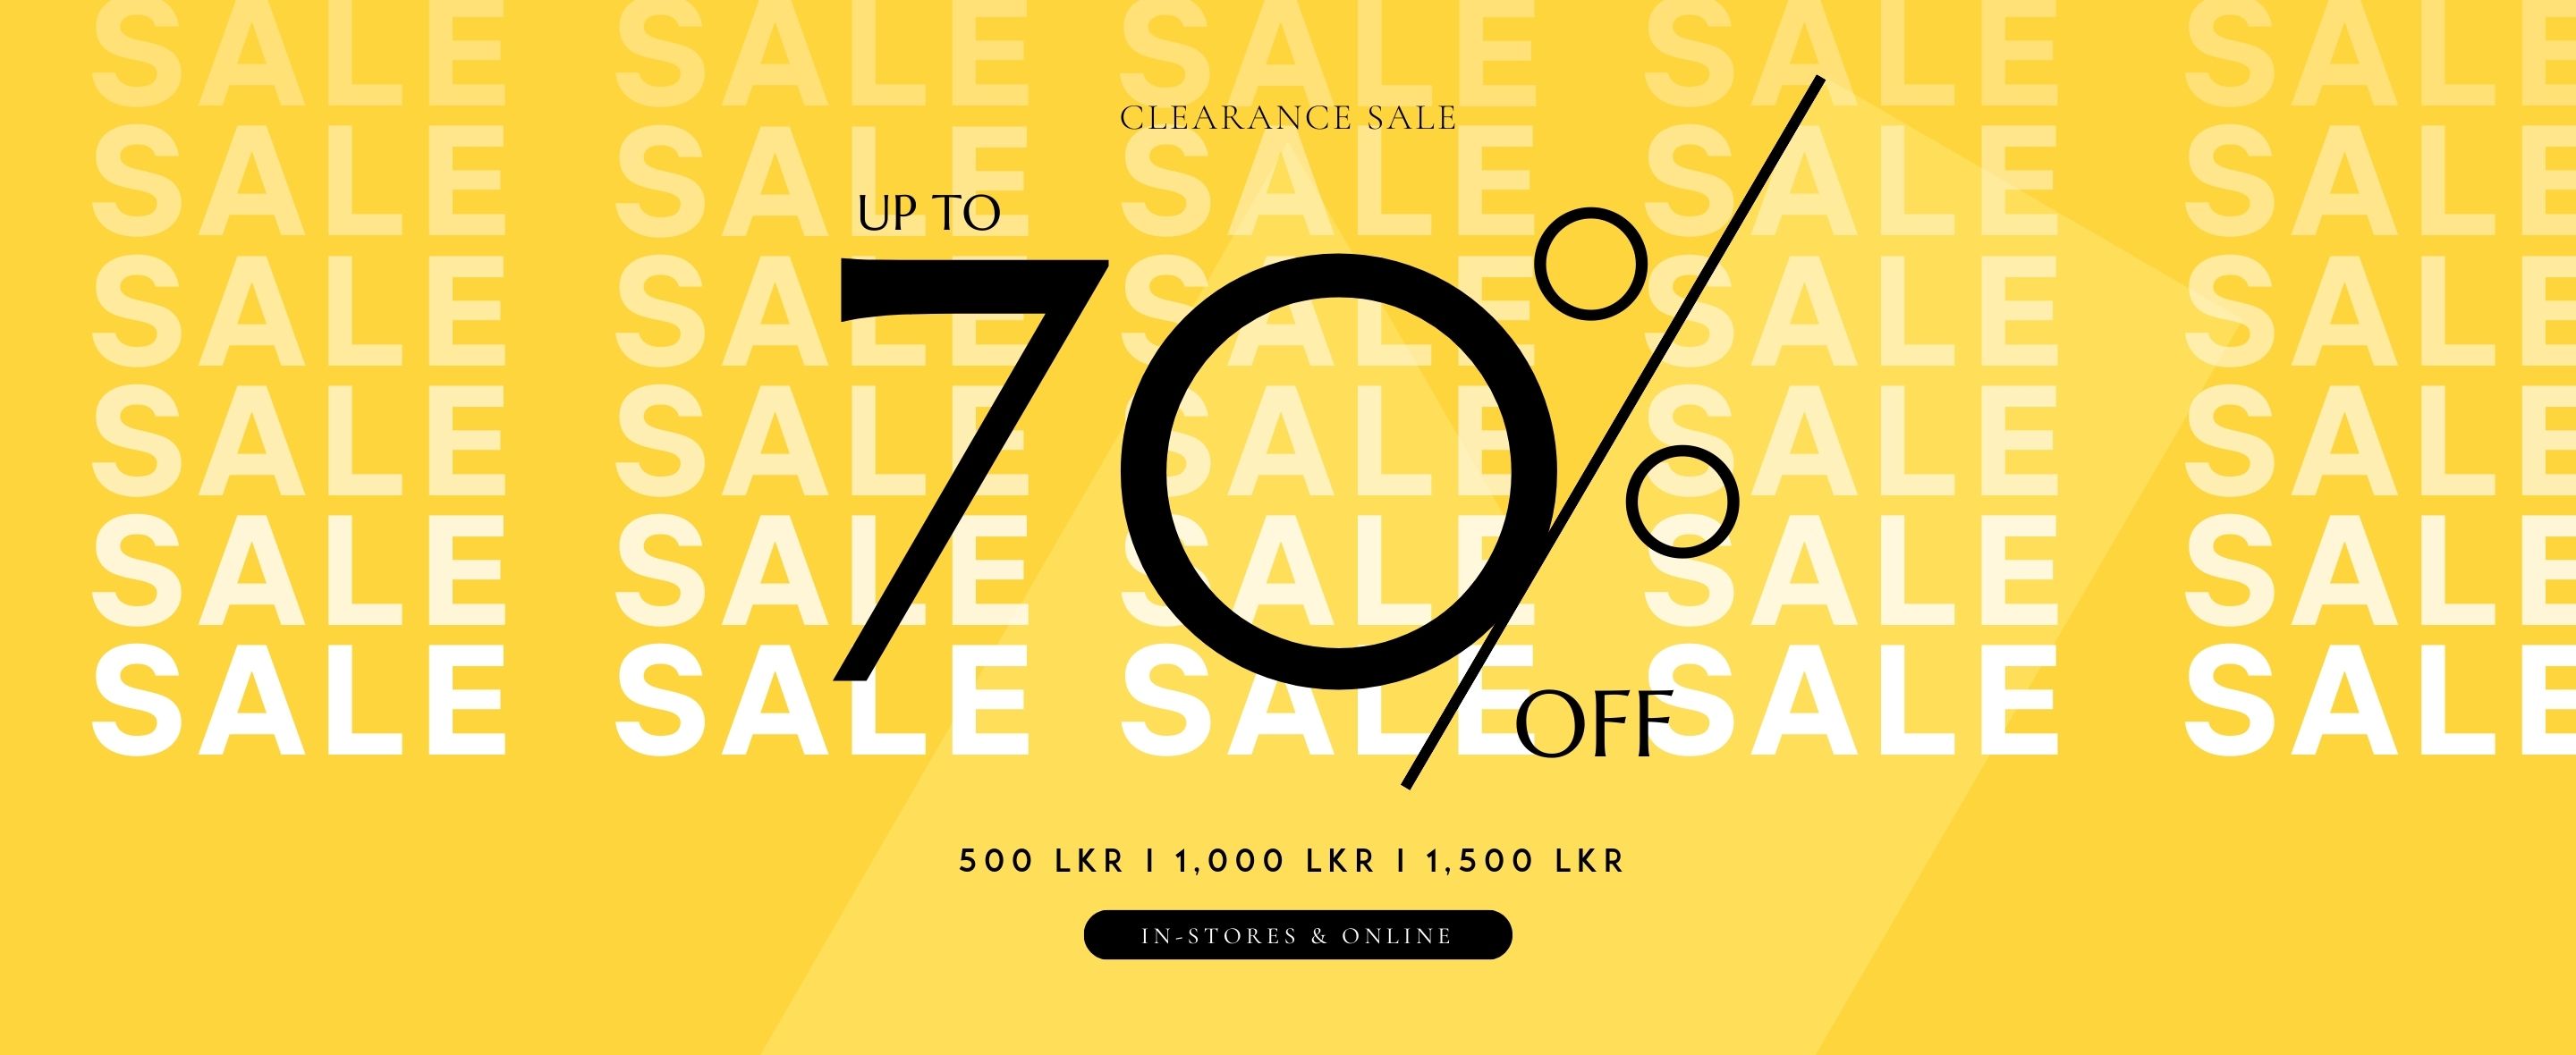 up to 70% off 